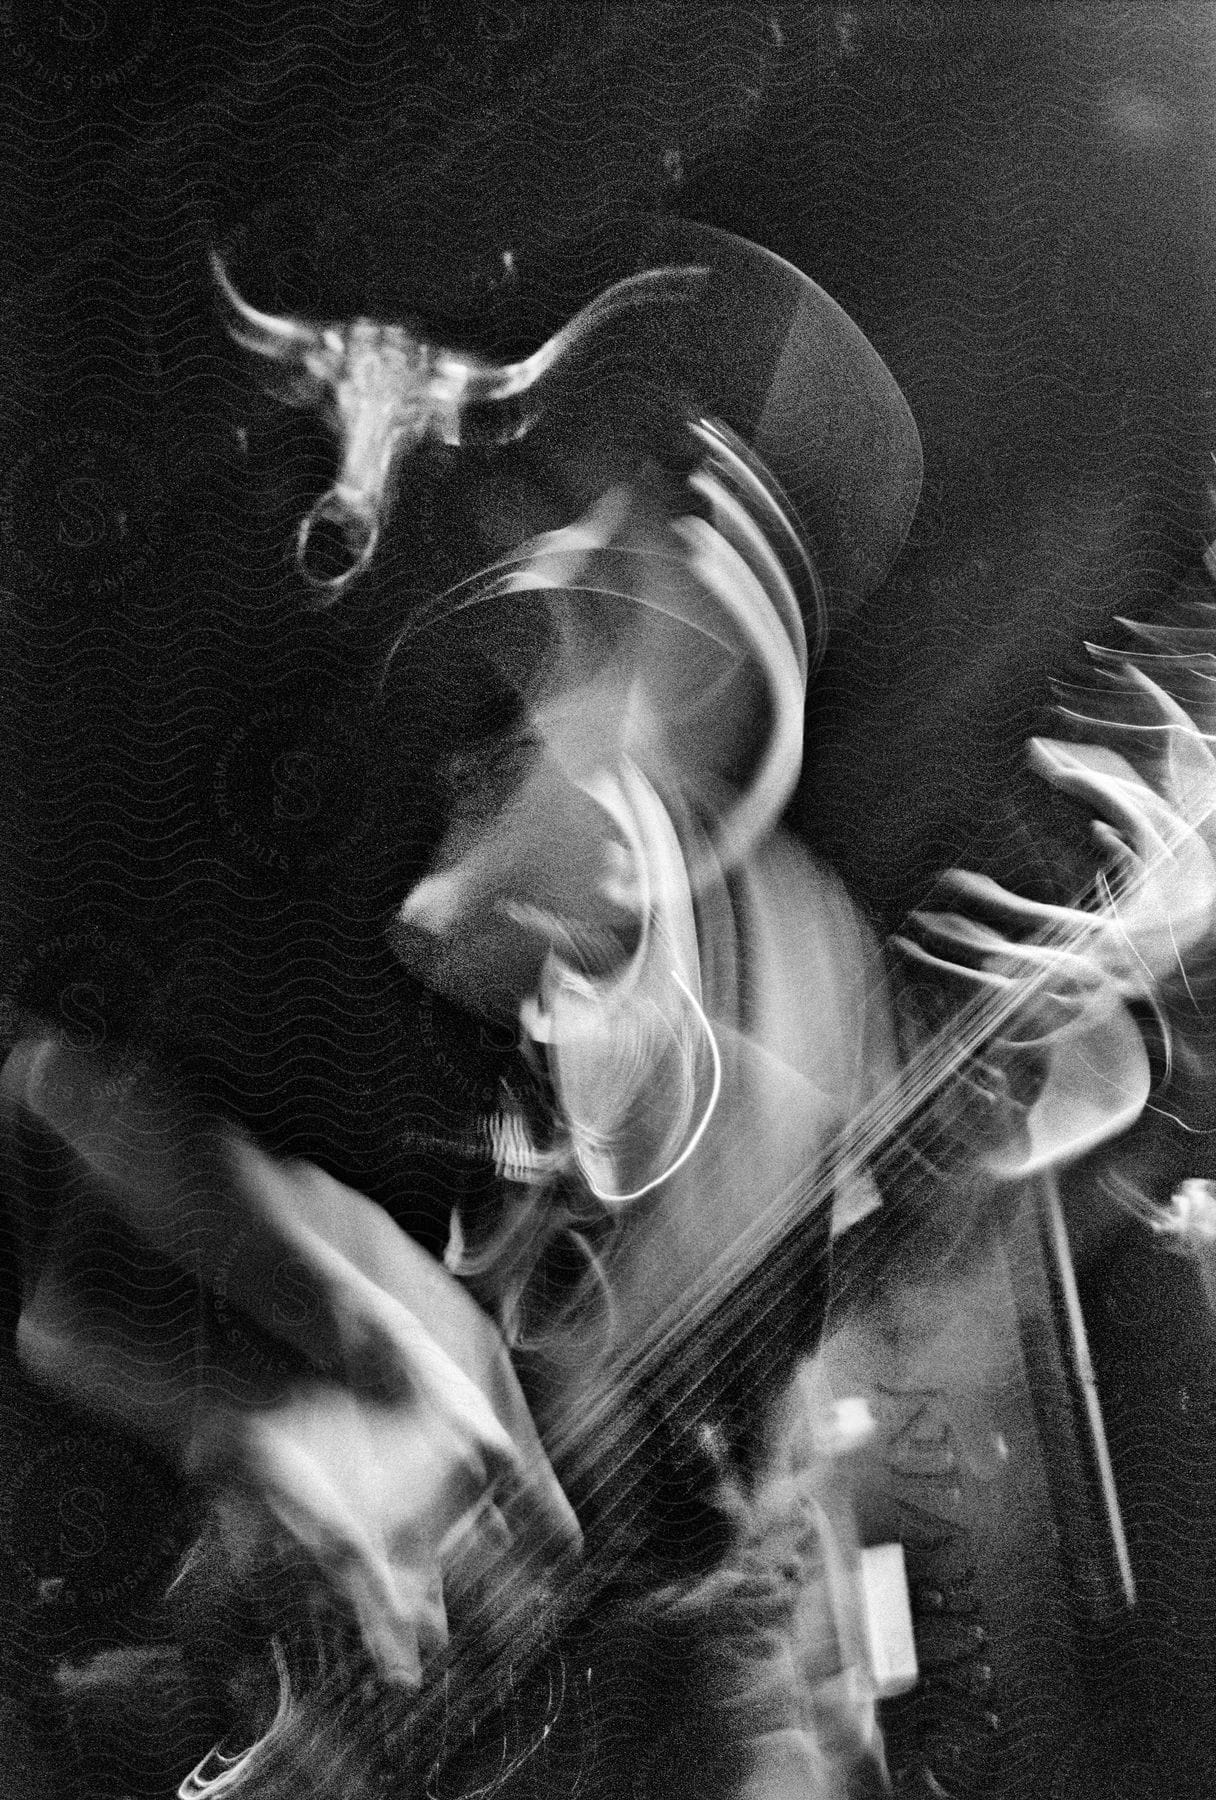 A black and white photo captures a man's hands in motion blur as he plays a guitar creating trails of light.